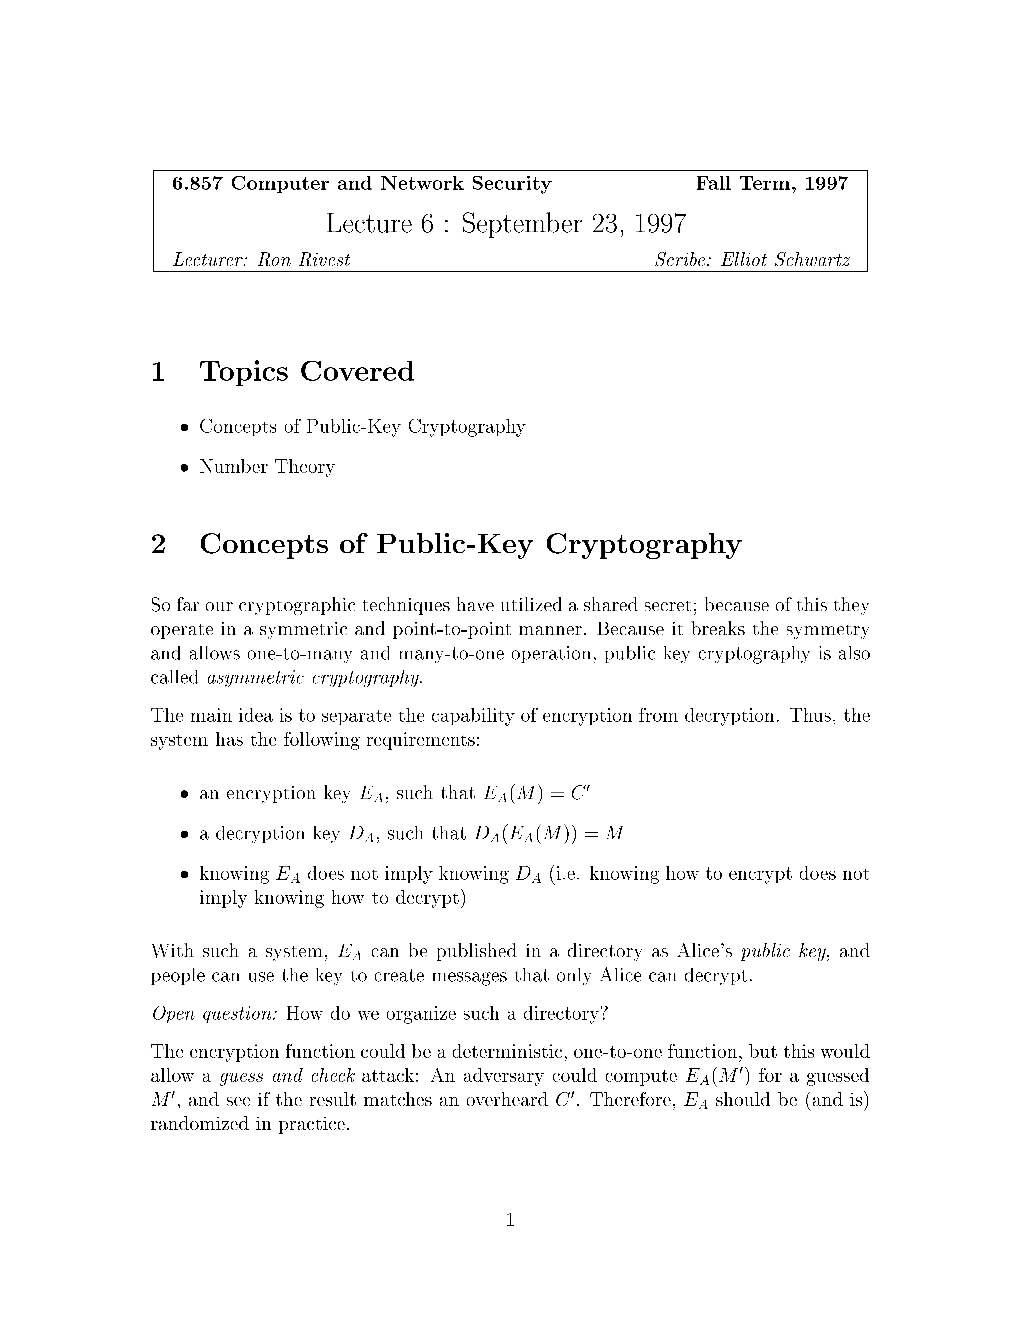 1 Topics Covered 2 Concepts of Public-Key Cryptography